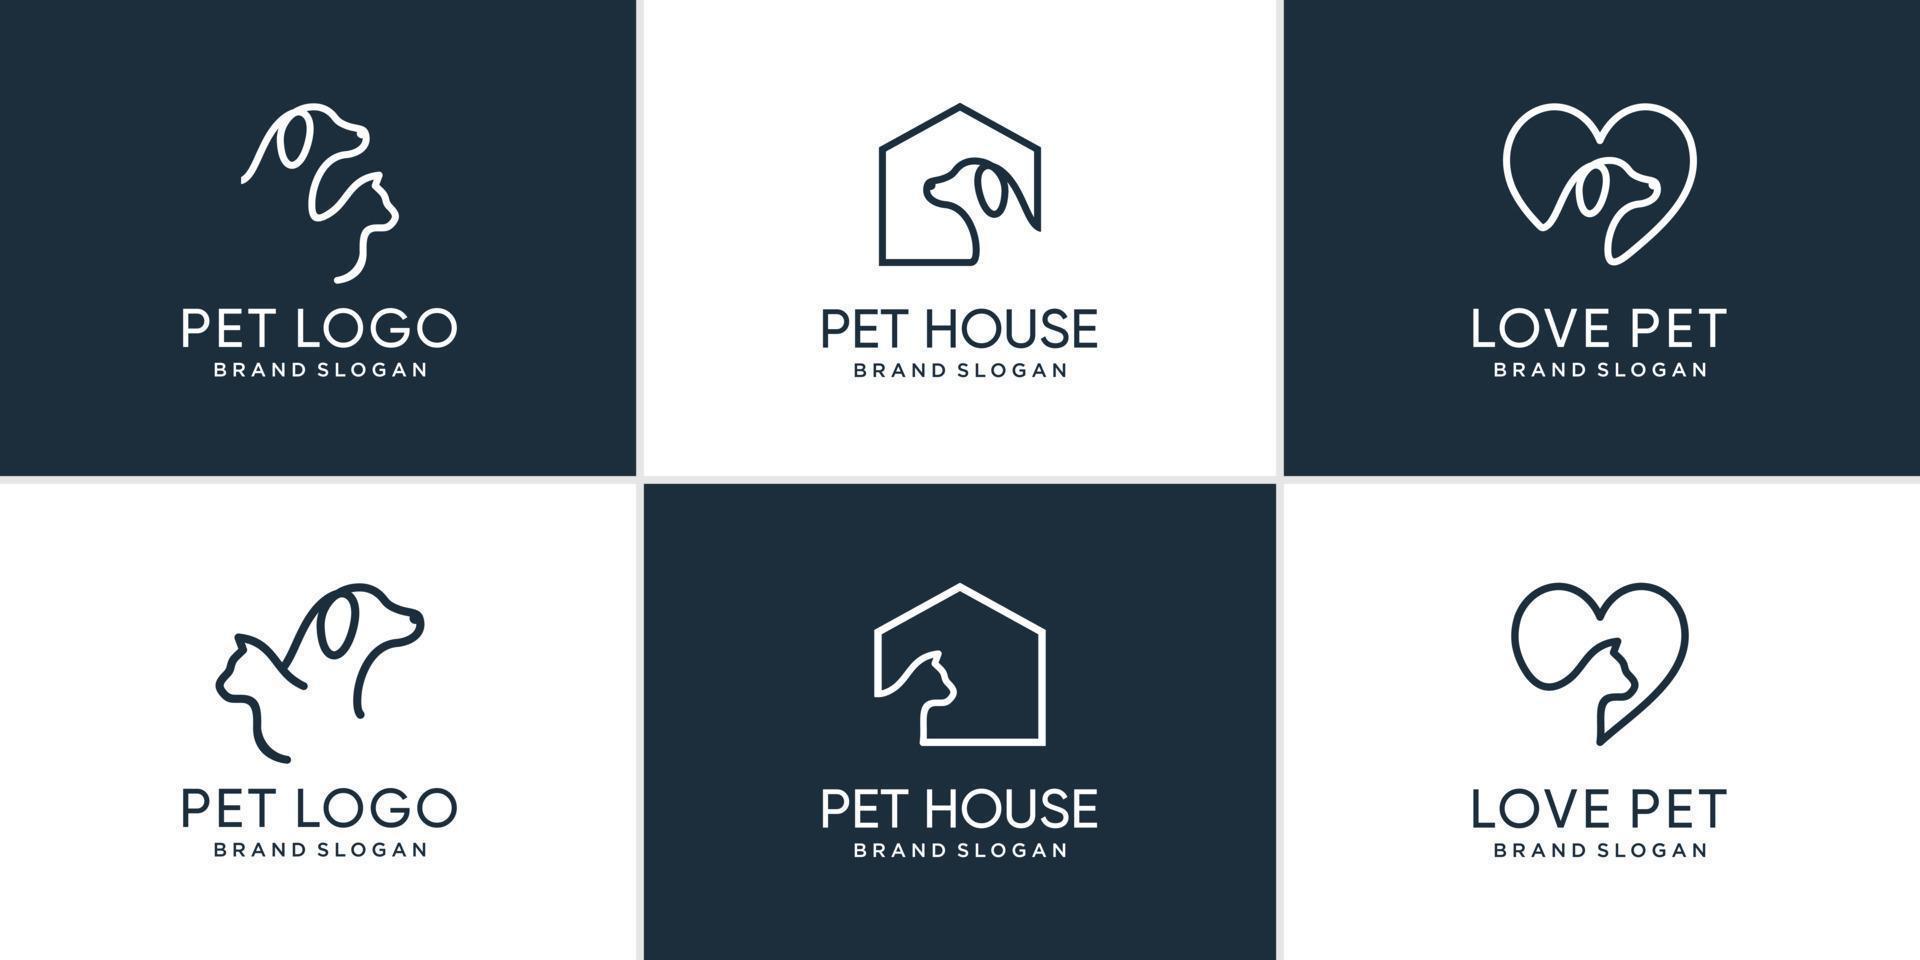 Pet logo collection with creative element dog and cat object Premium Vector